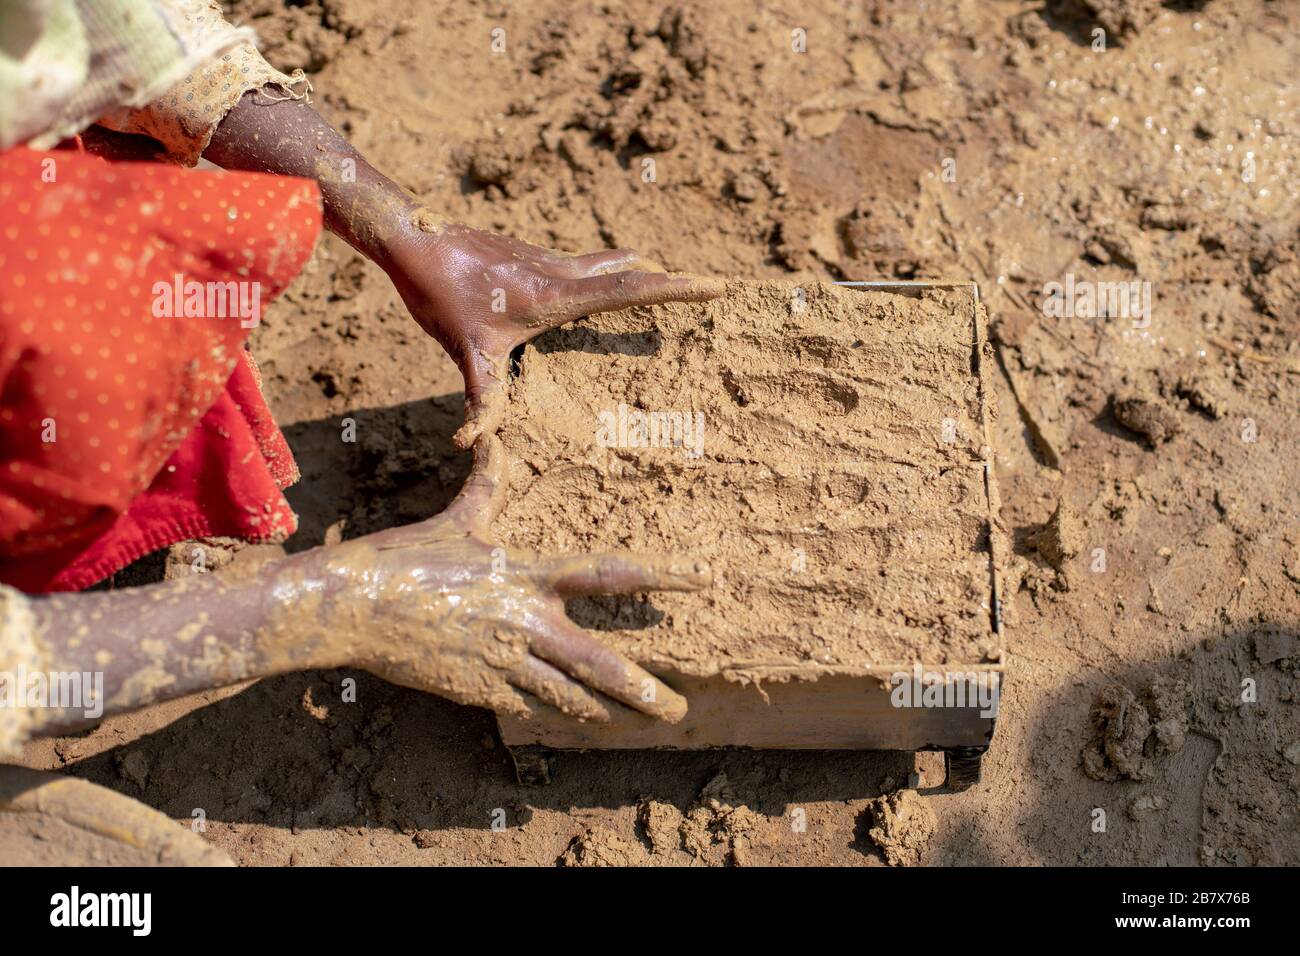 A woman making bricks fills molds by hand Stock Photo